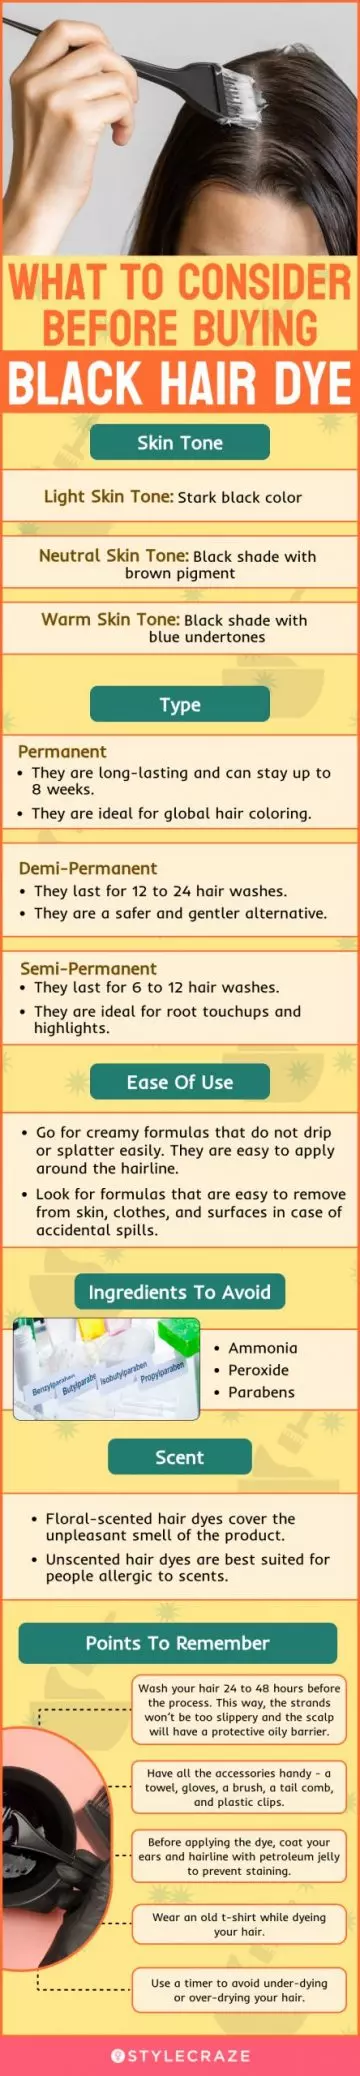 What To Consider Before Buying Black Hair Dye (infographic)